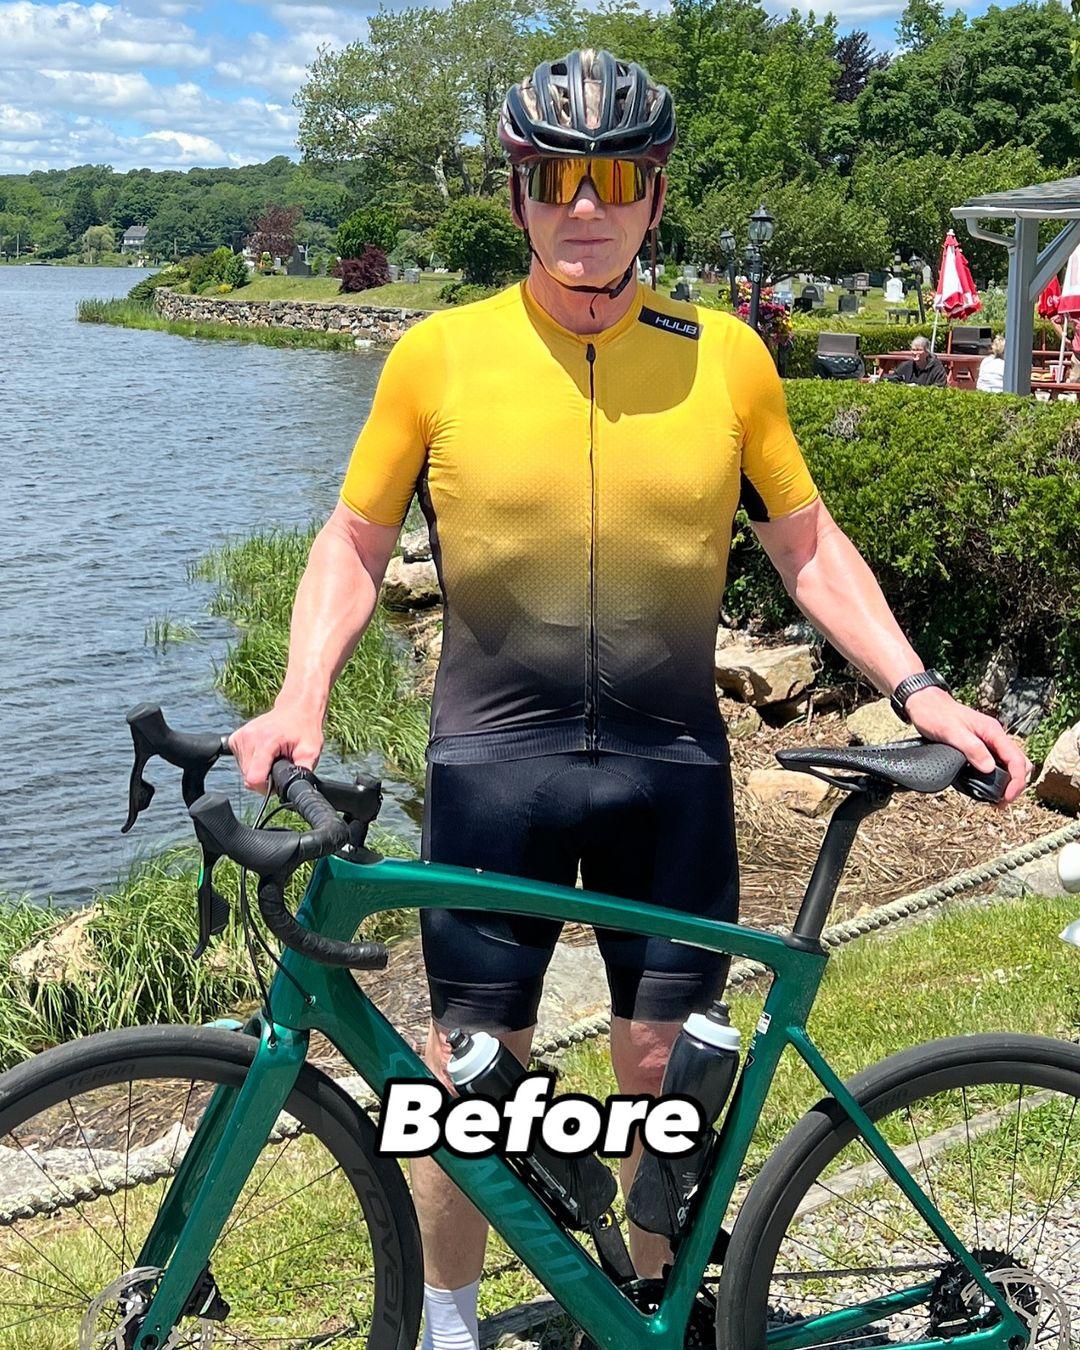 Gordon Ramsay wearing a helmet with his bicycle.